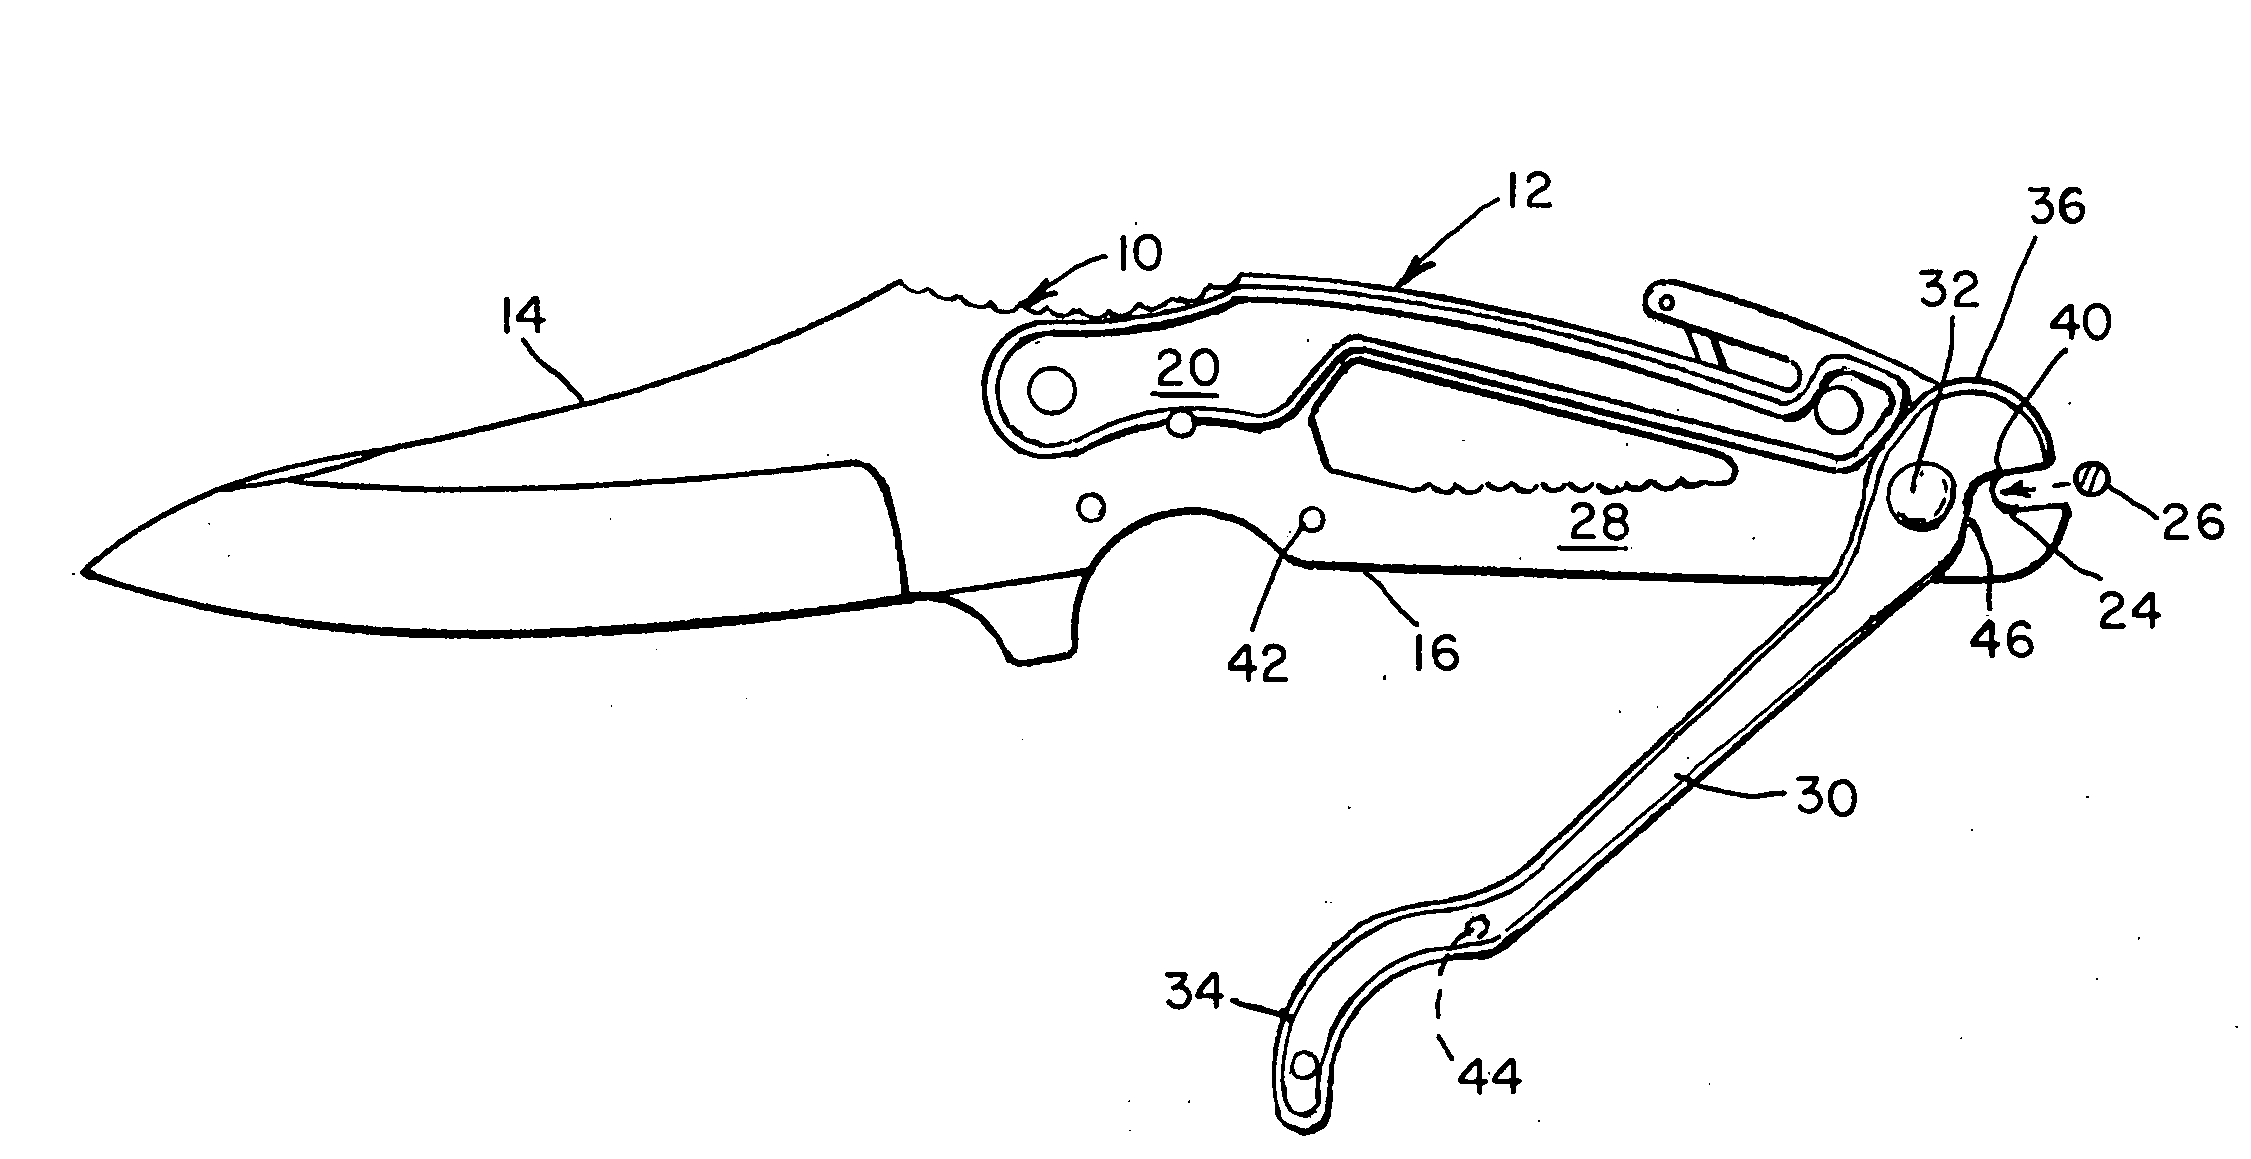 Knives with wire cutter